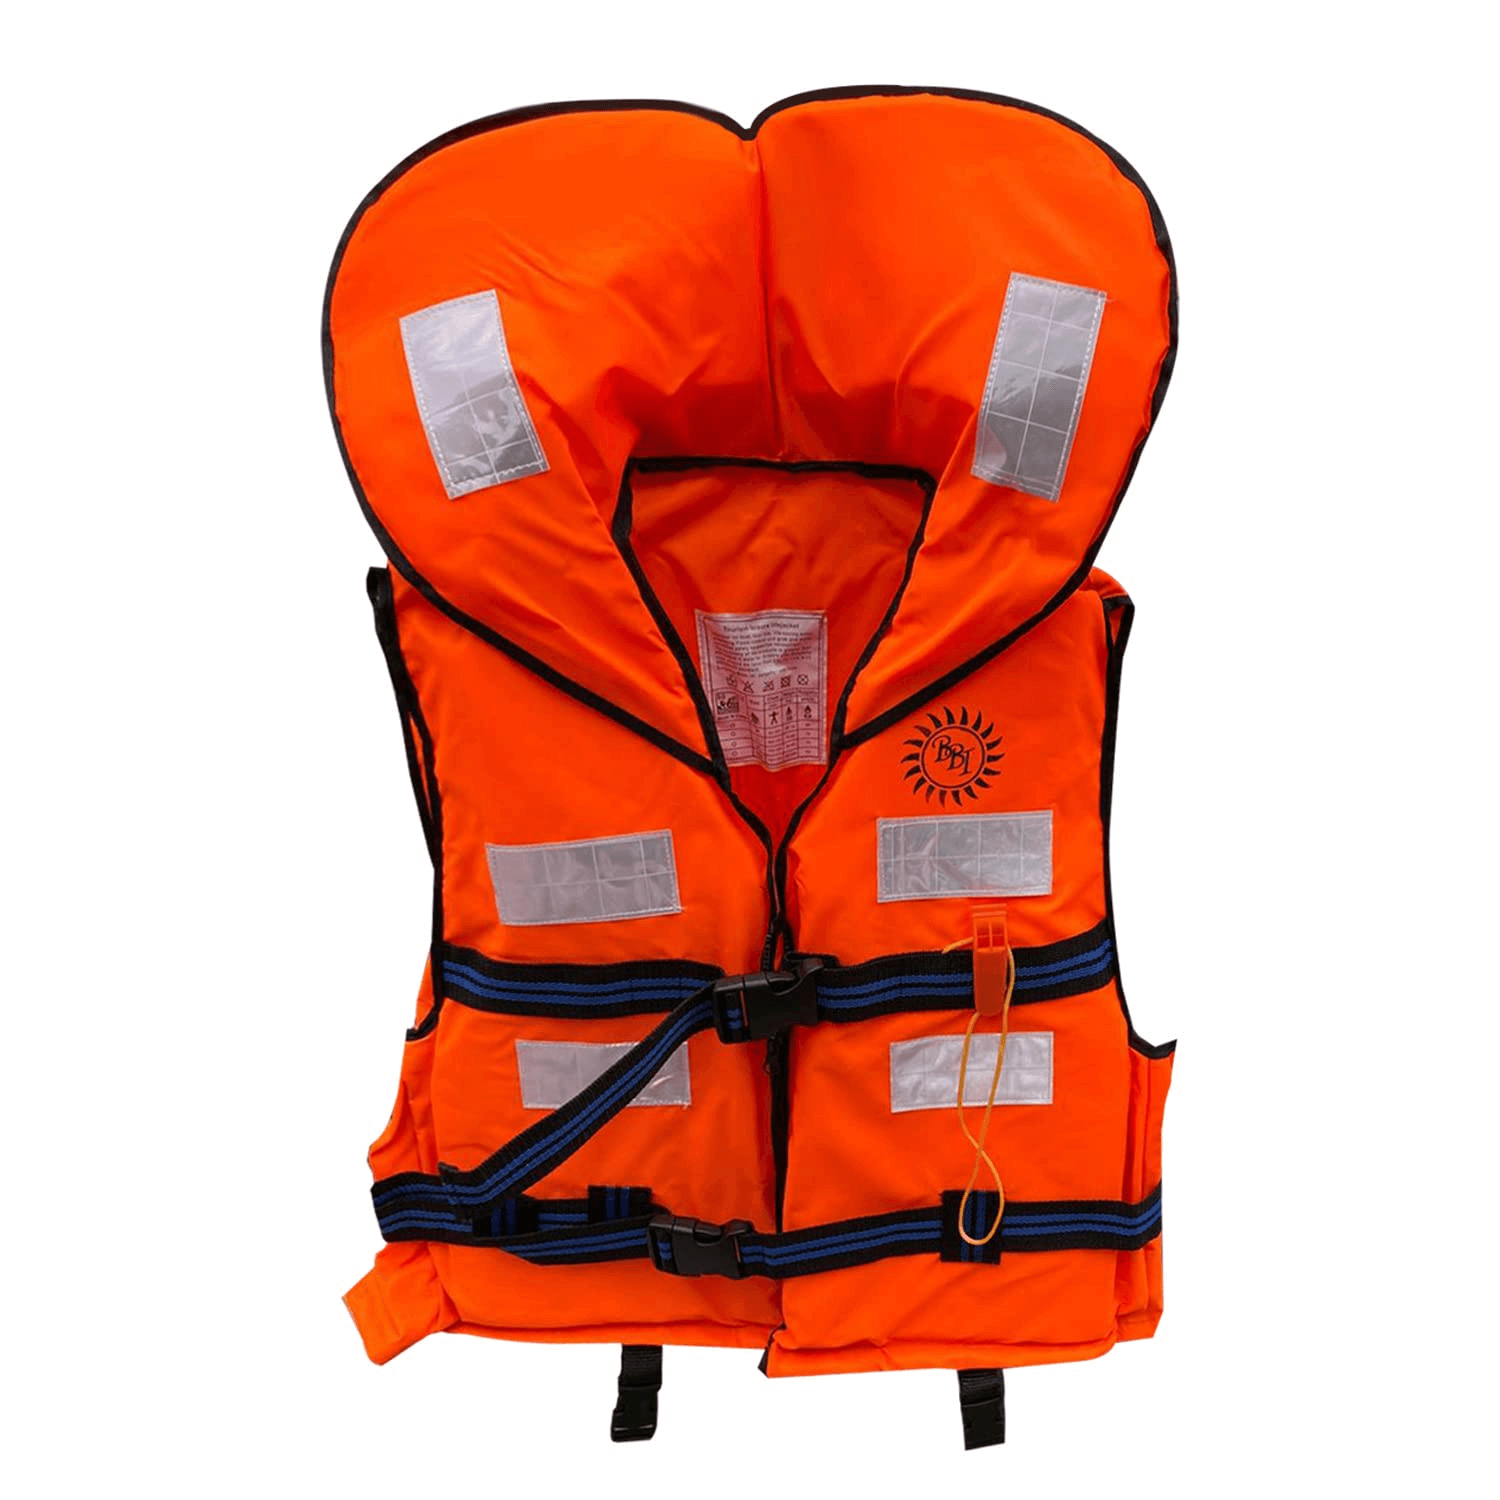 robustt-life-jacket-polyester-fabric-with-epe-foam-for-adult-safety-jacket-along-with-whistle-weight-capacity-upto-125-kg-pack-of-1